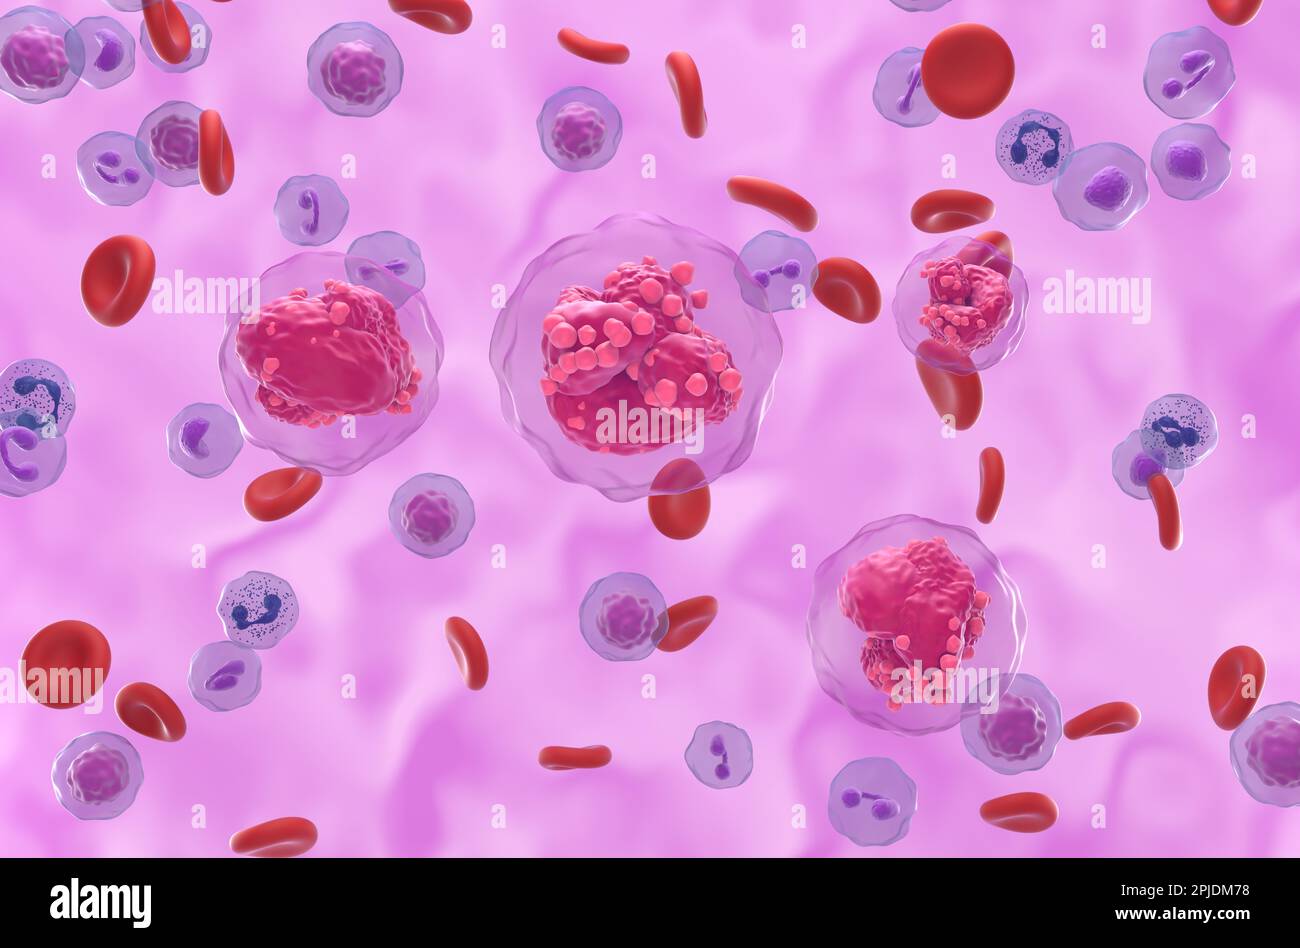 Acute lymphoblastic leukemia (ALL) cancer cells in the blood flow - isometric view 3d illustration Stock Photo